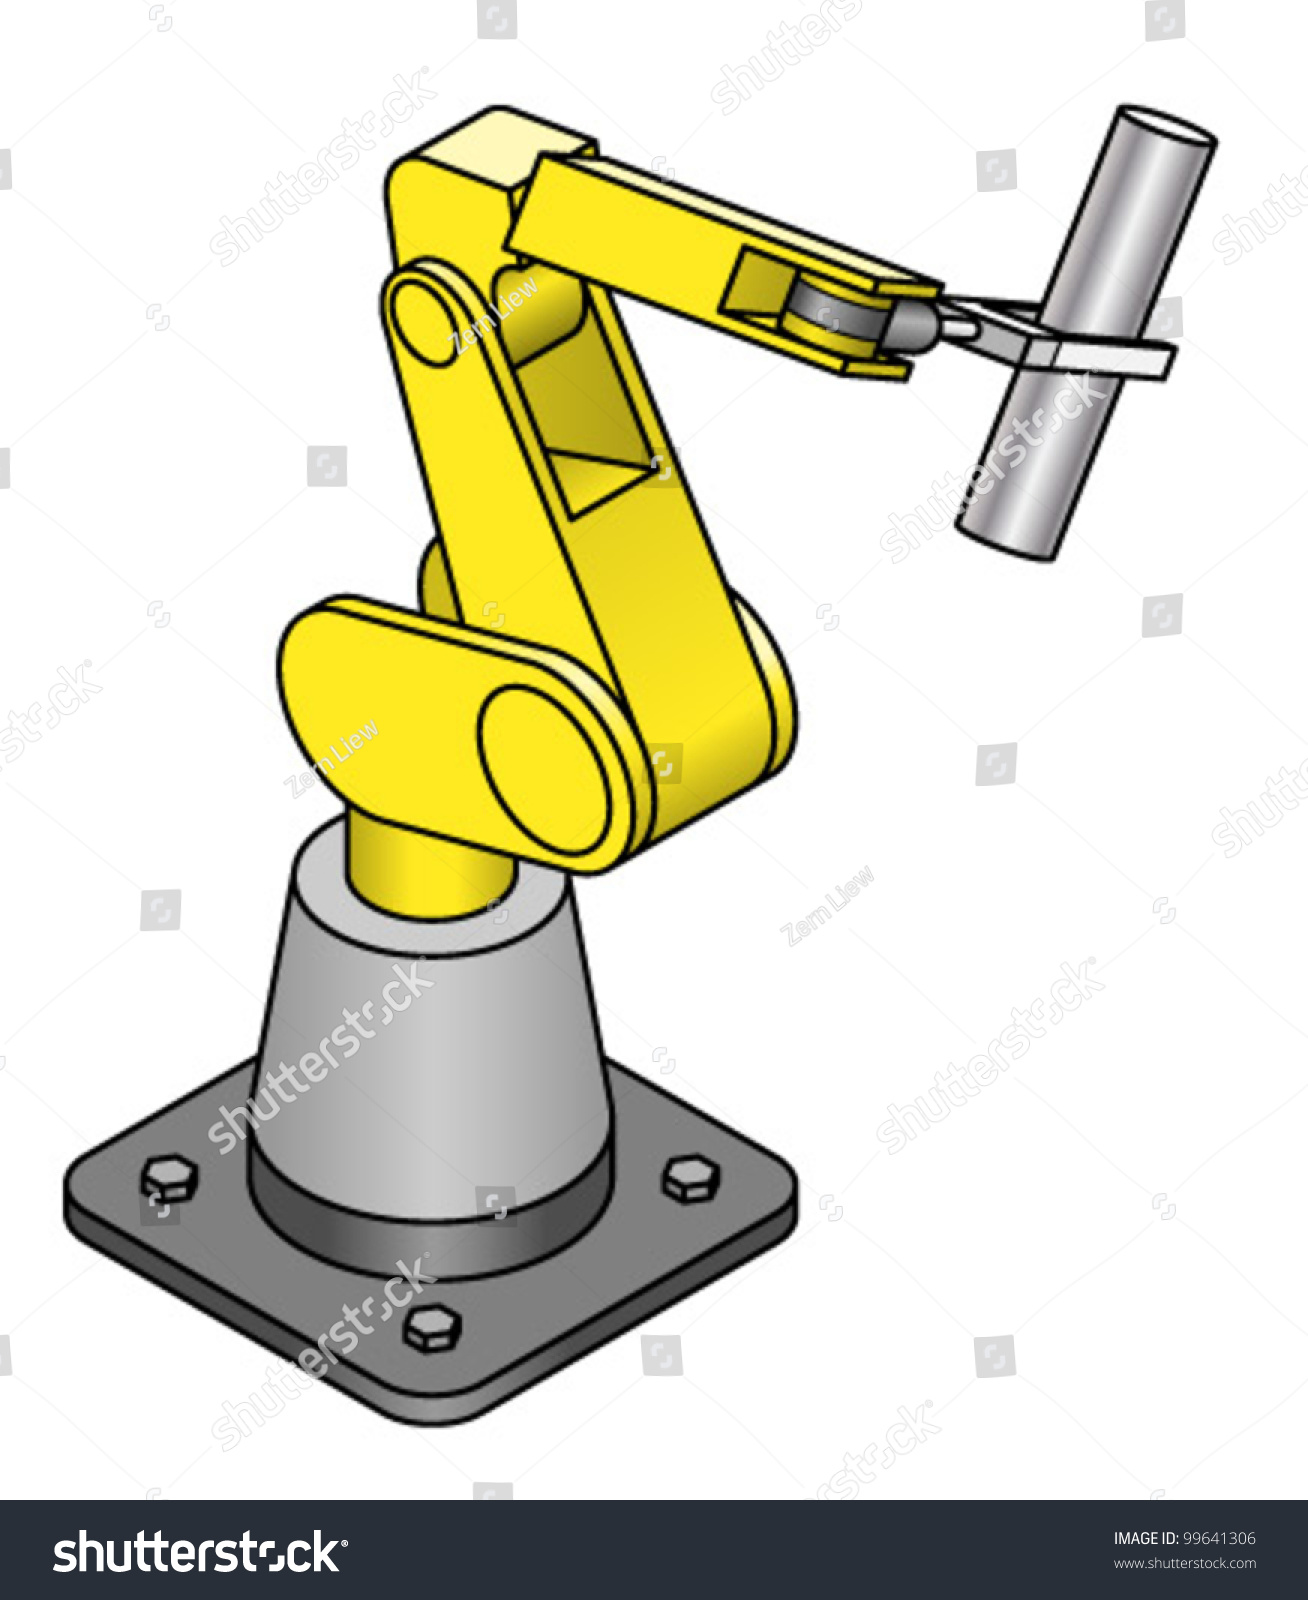 industrial robot clipart - photo #9